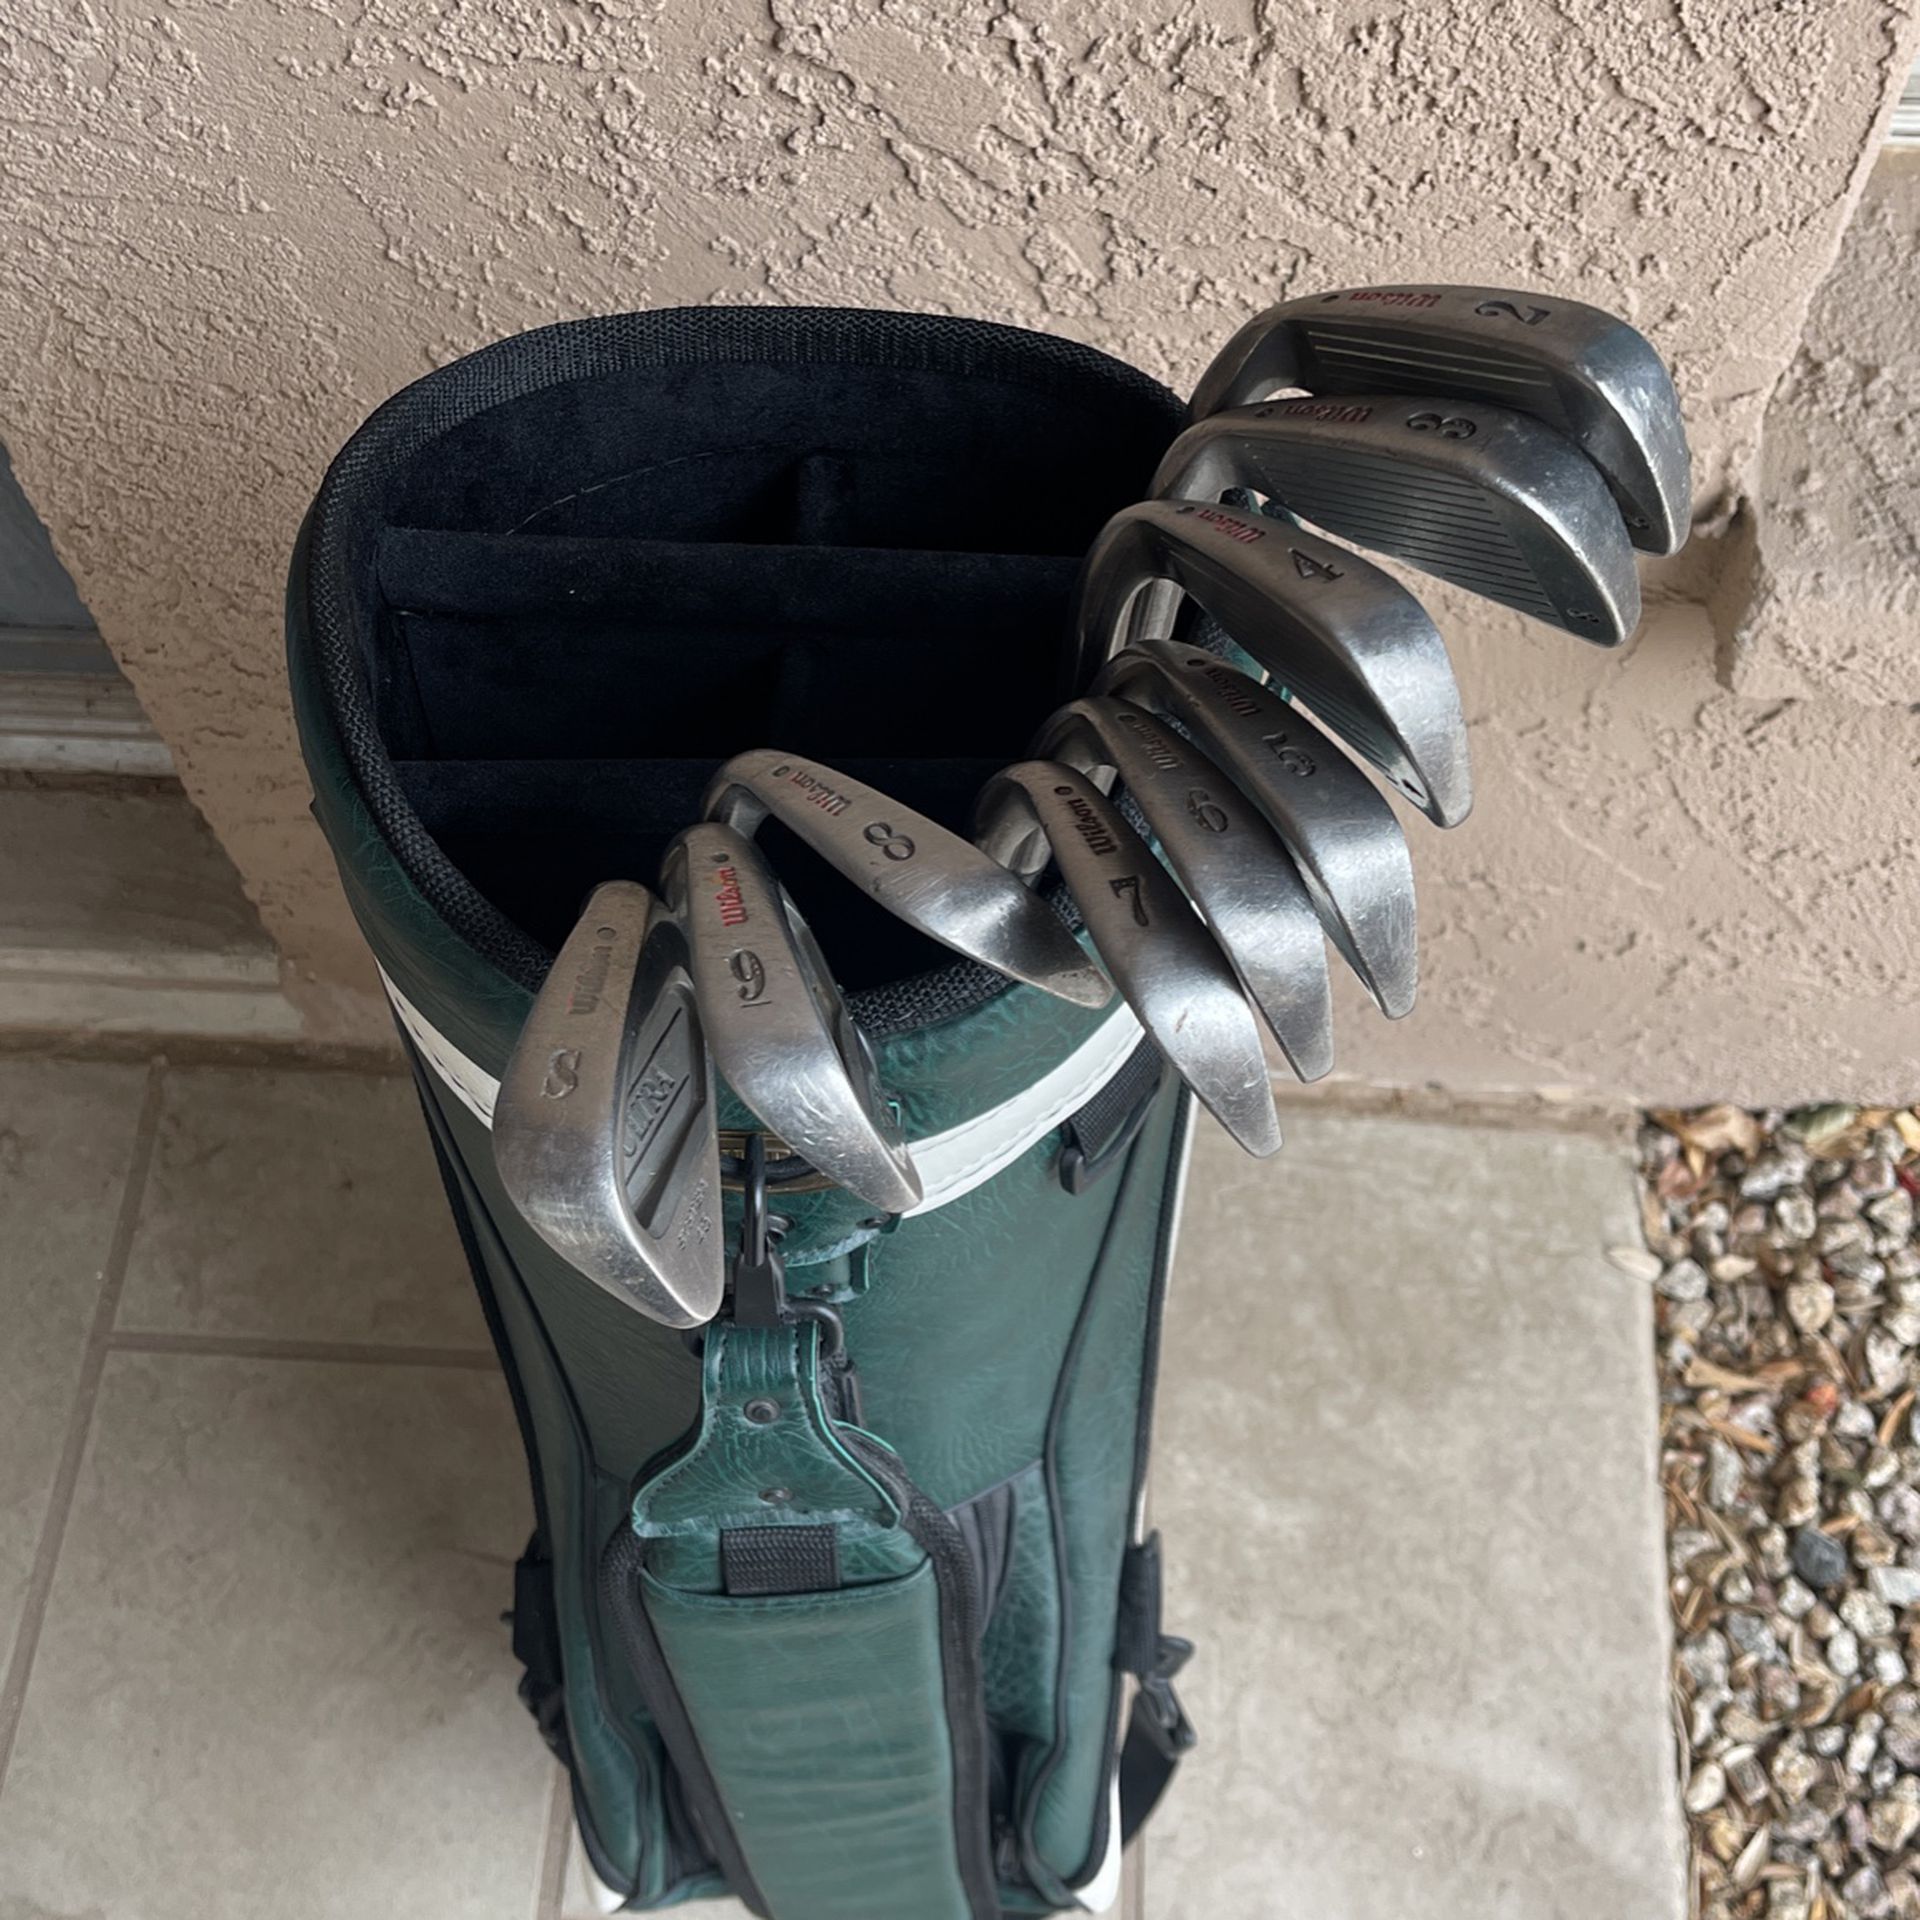 Wilson Ultra Golf Clubs With Burton Golf Bag Irons 2-9 And Sand Wedge  Cavity Backs System 45 Steel Shafts for Sale in Scottsdale, AZ - OfferUp